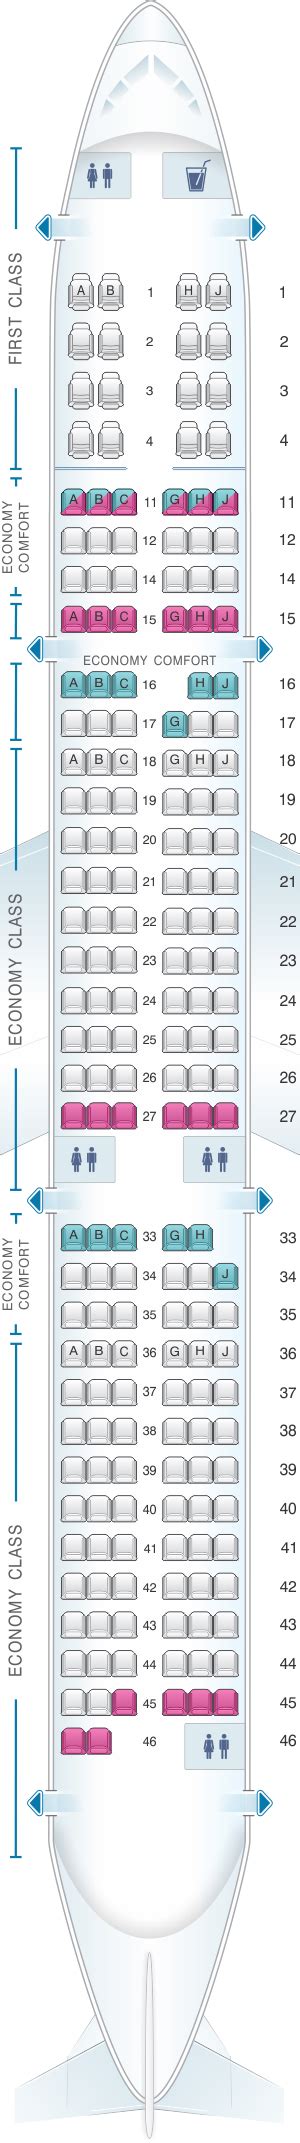 Hawaiian airlines seatguru. Before your next Hawaiian Airlines flight, be sure to visit our check-in guide to answer some of the most commonly asked questions. Hawaiian Airlines: Check-in Policy - SeatGuru Seat Maps 